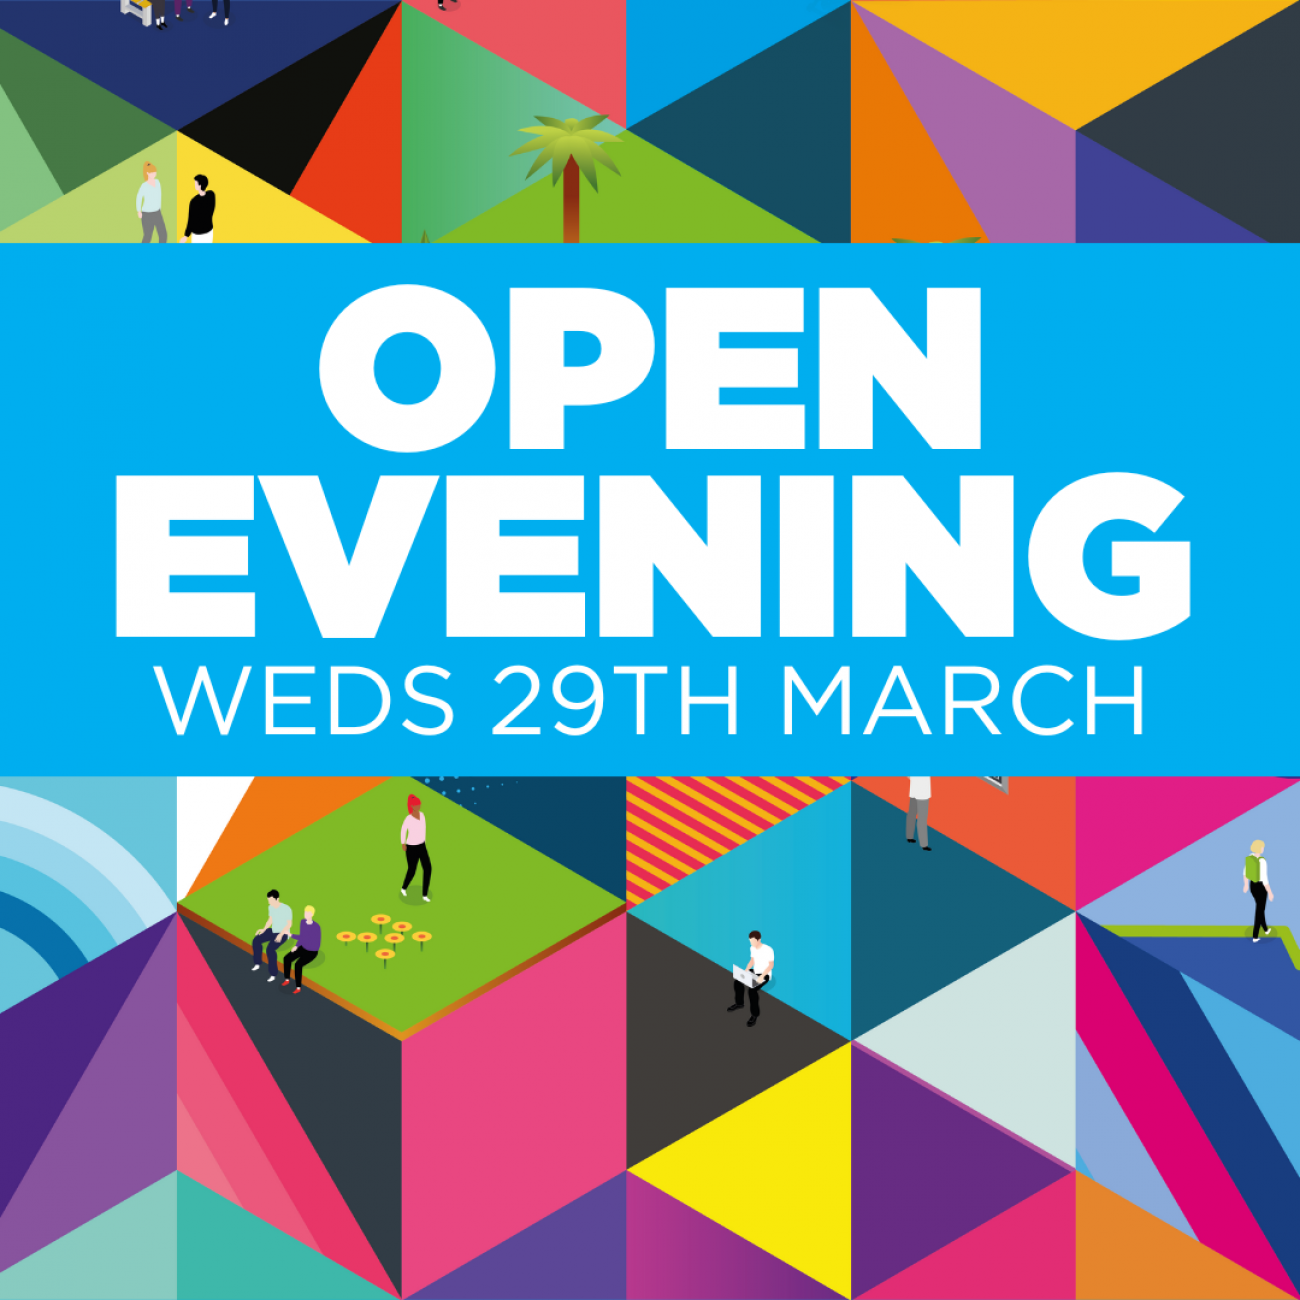 OPEN EVENING - WEDS 29TH mARCH GRAPHIC